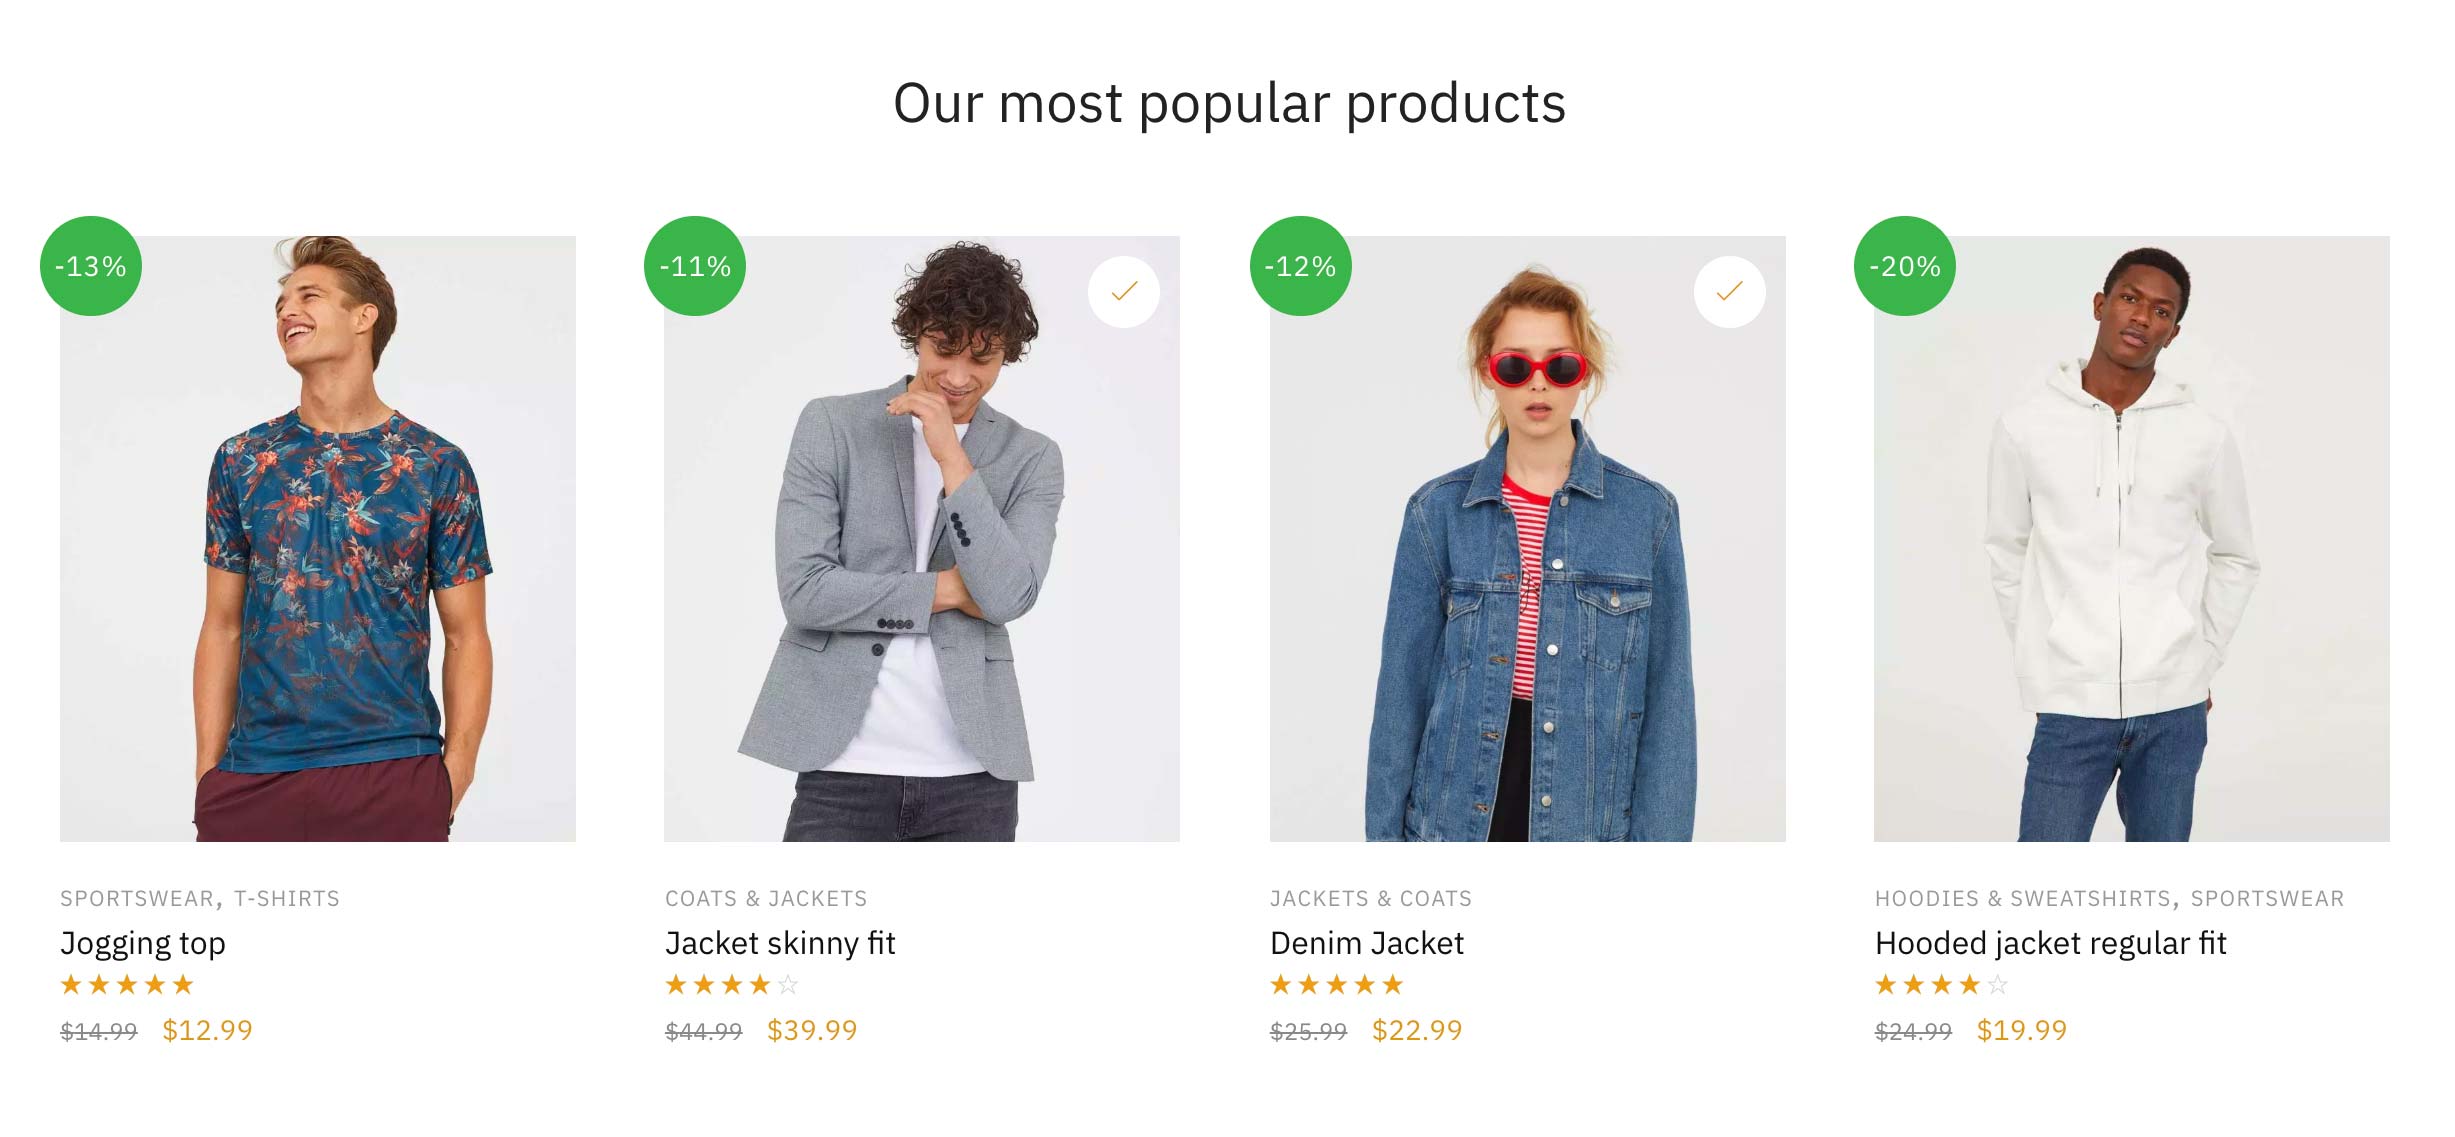 Displaying the most popular products in your store